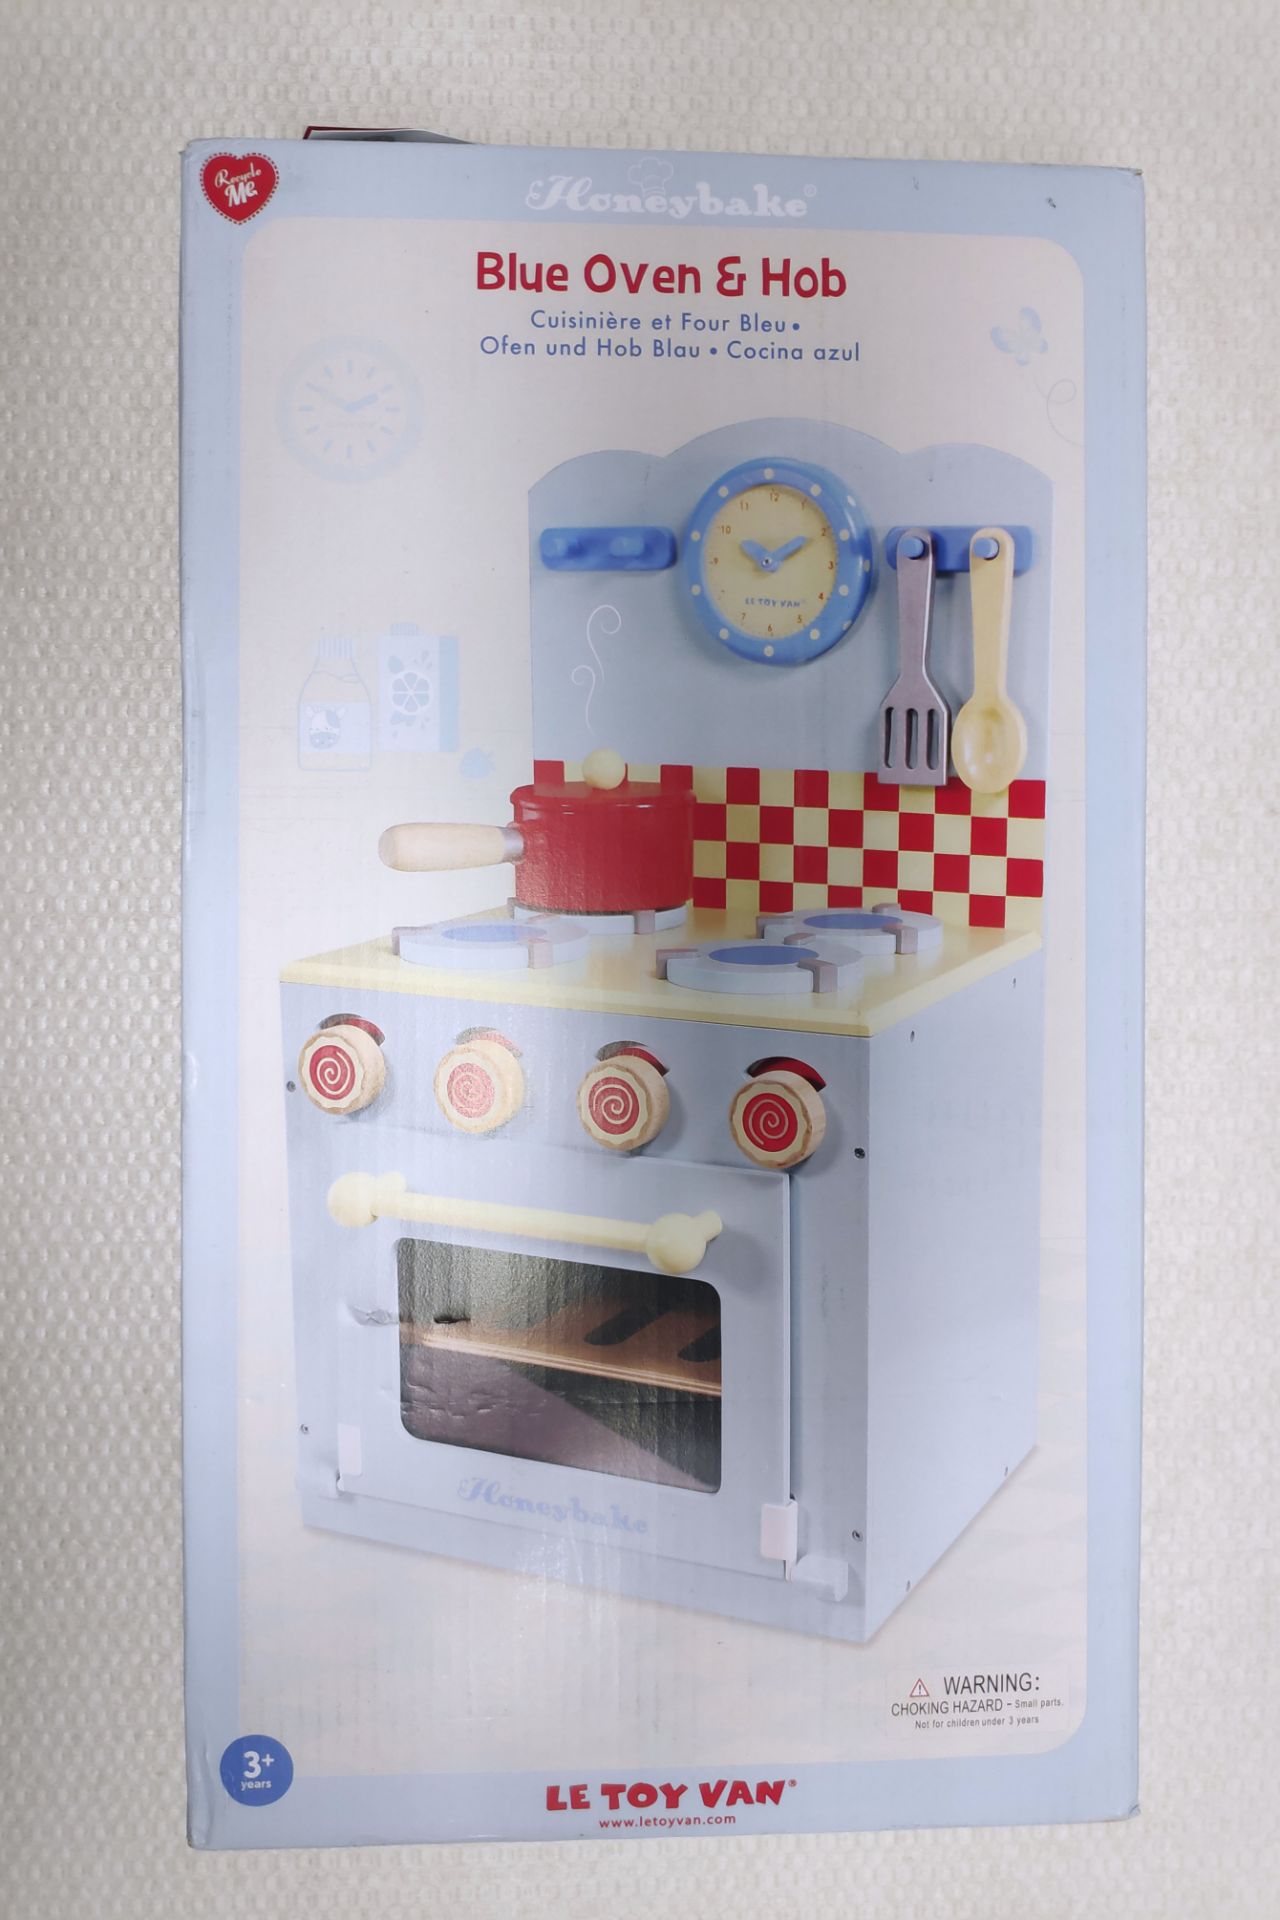 1 x Le Toy Van Honeybake Childrens Wooden Blue Oven & Hob - New/Boxed - Image 6 of 7